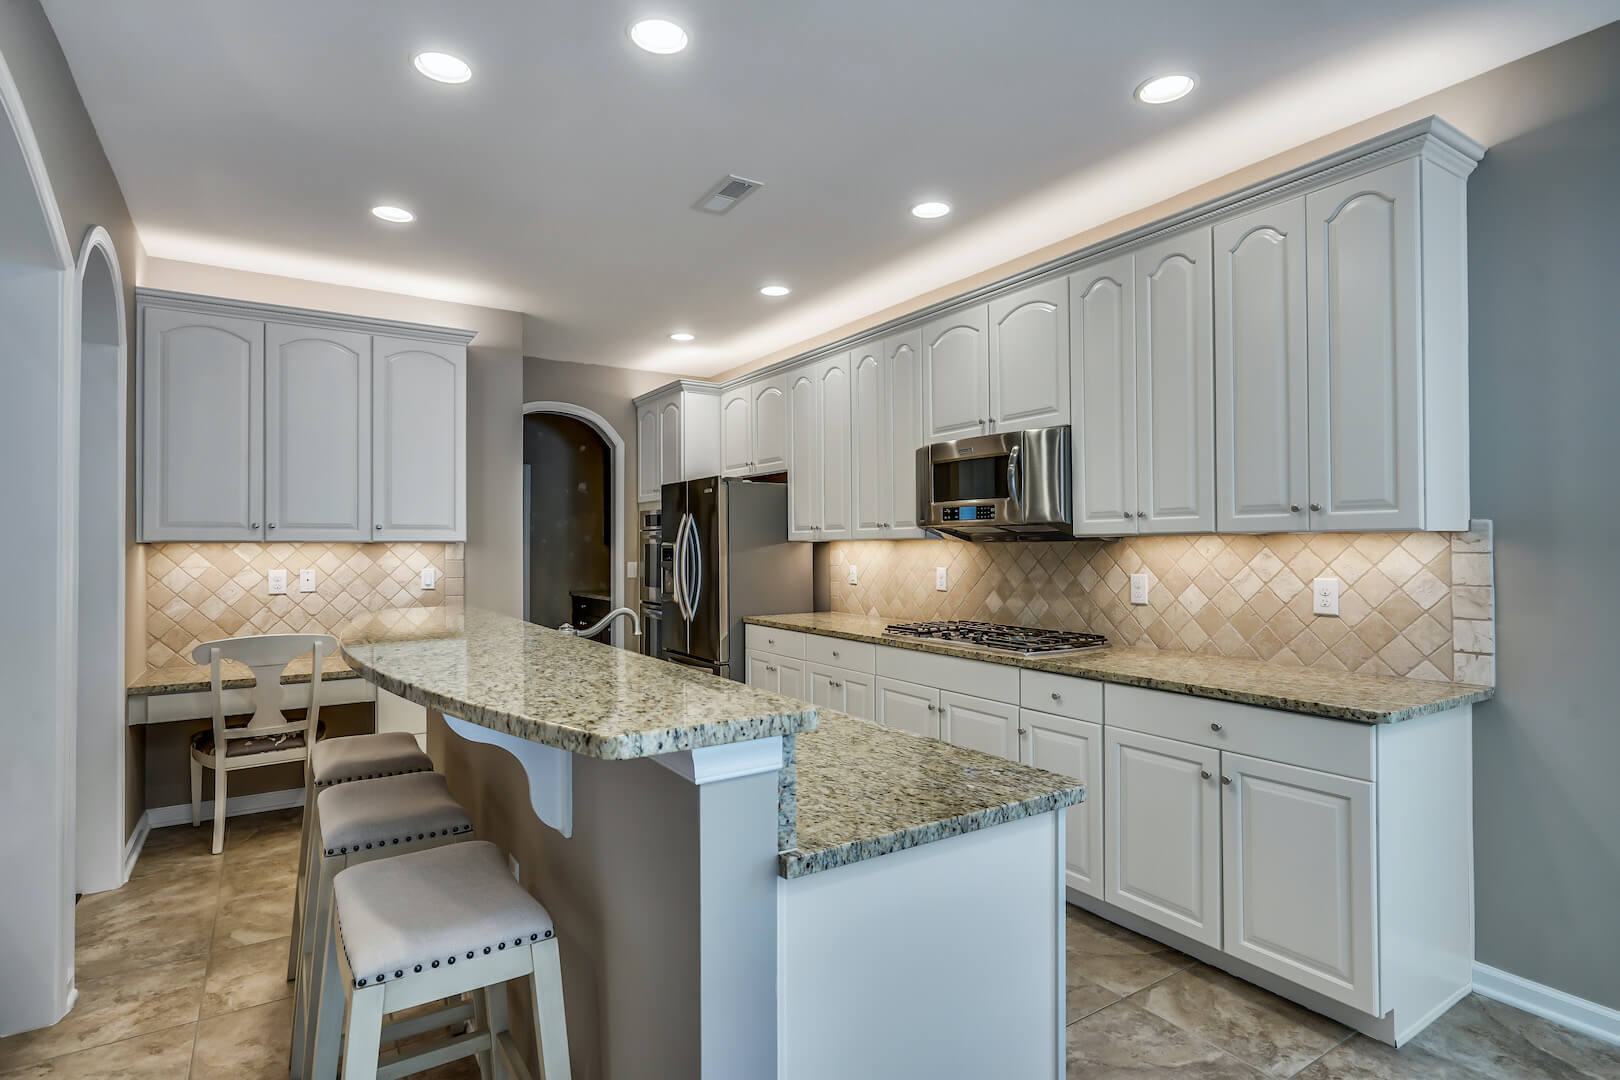 After-Equestra Retirement Community Kitchen